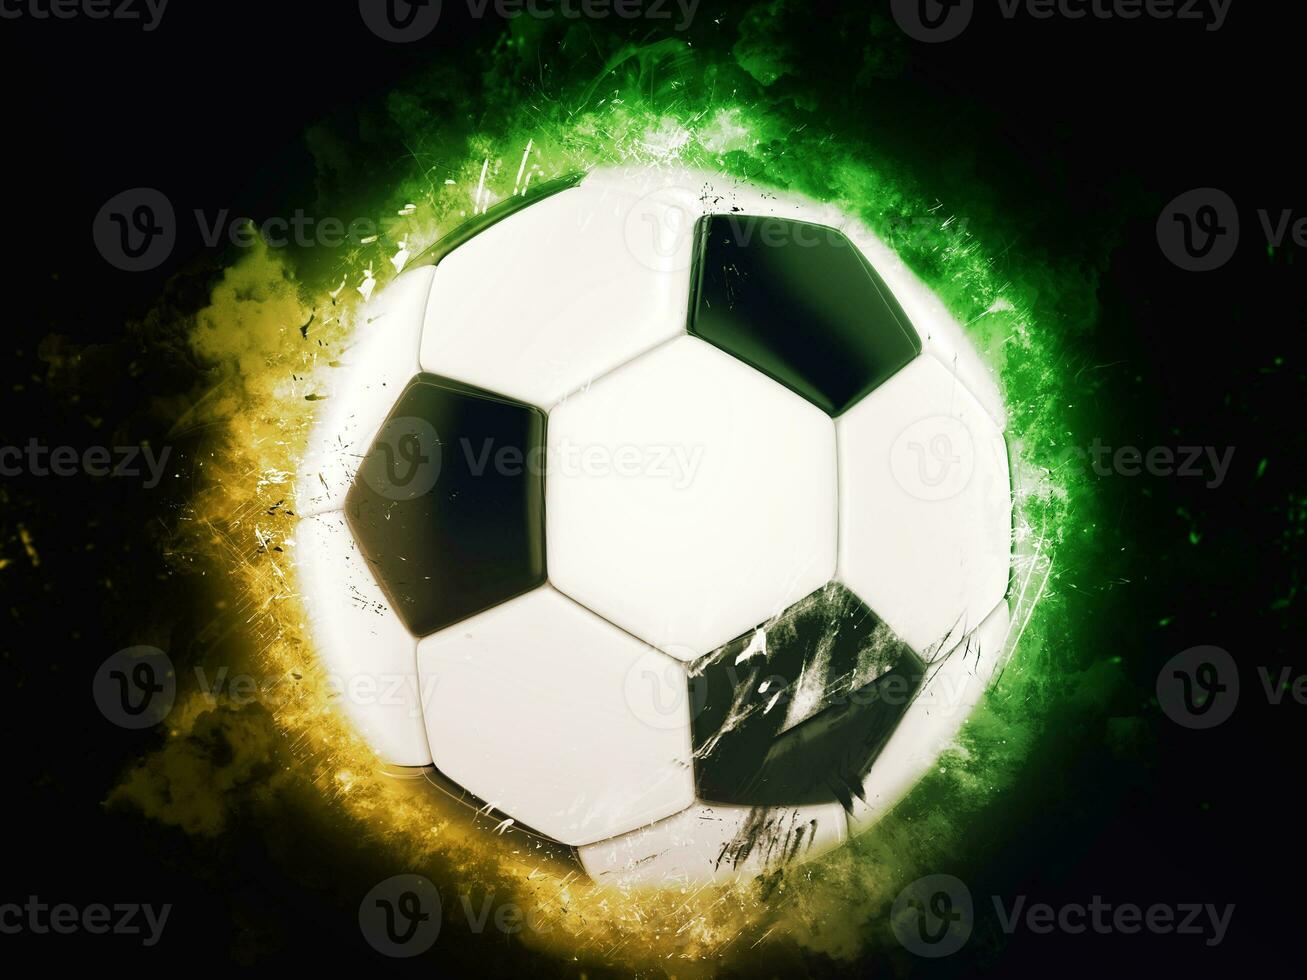 Soccer ball - yellow and green abstract background photo